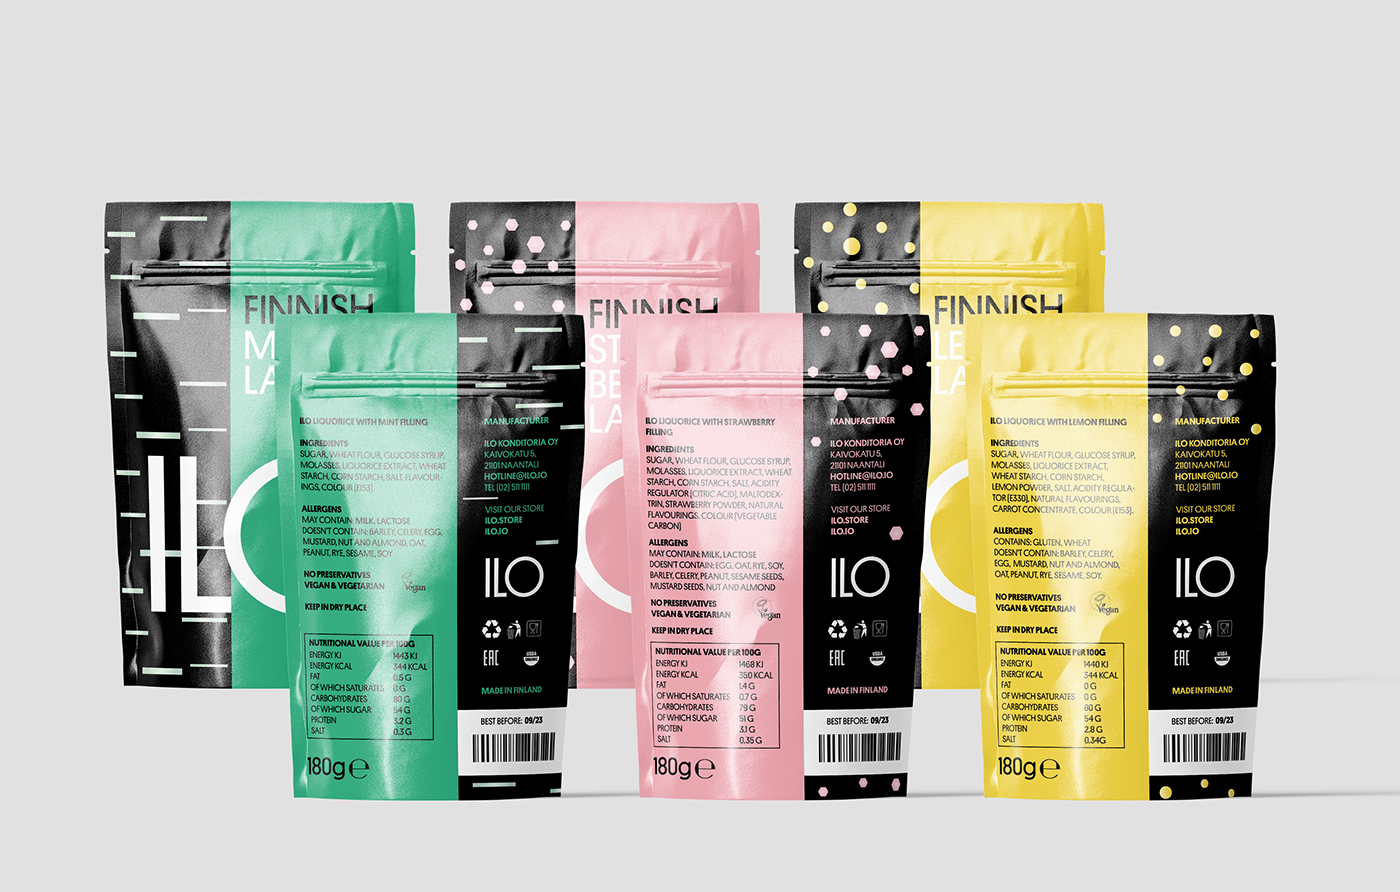 Advertising  Candies finland hse art and design school liquorice package Packaging packaging design Sweets visual identity